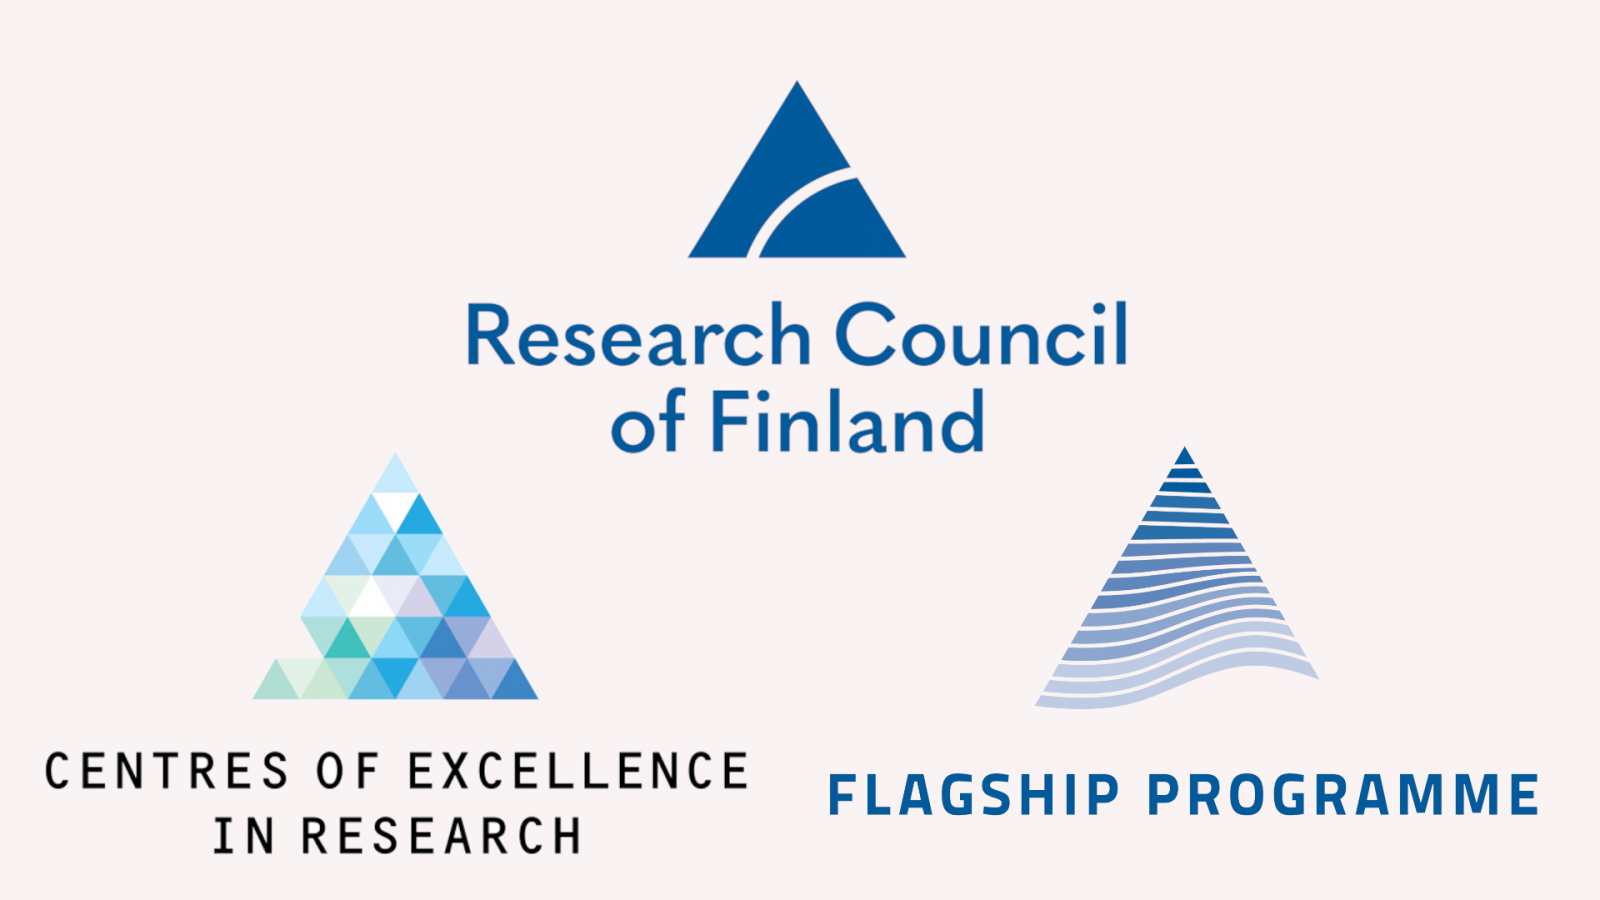 Research Council of Finland logos: Center of Excellence and Flagship Programme